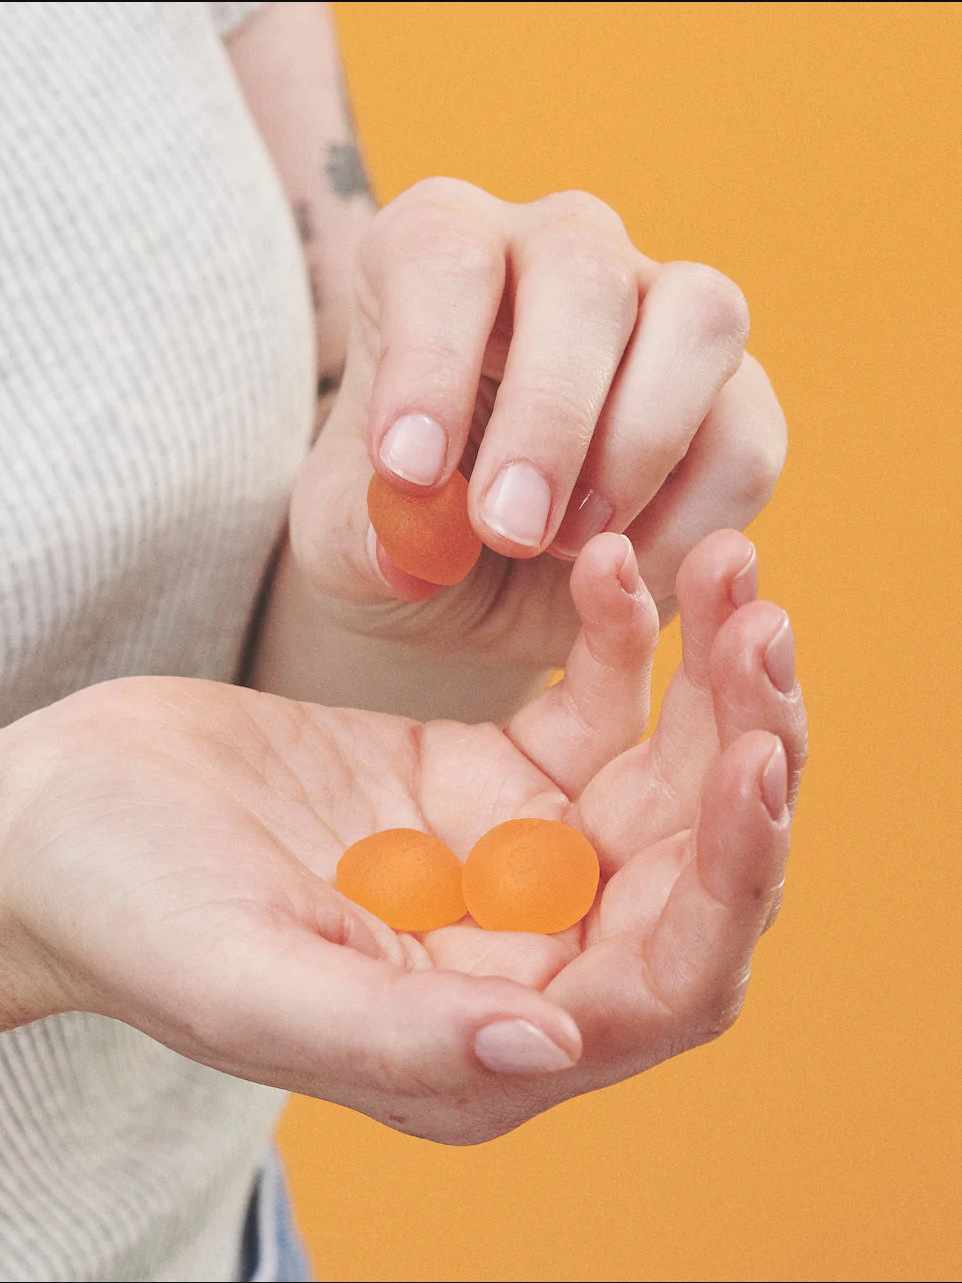 A person holds three orange lozenges in their cupped hands against an orange background.